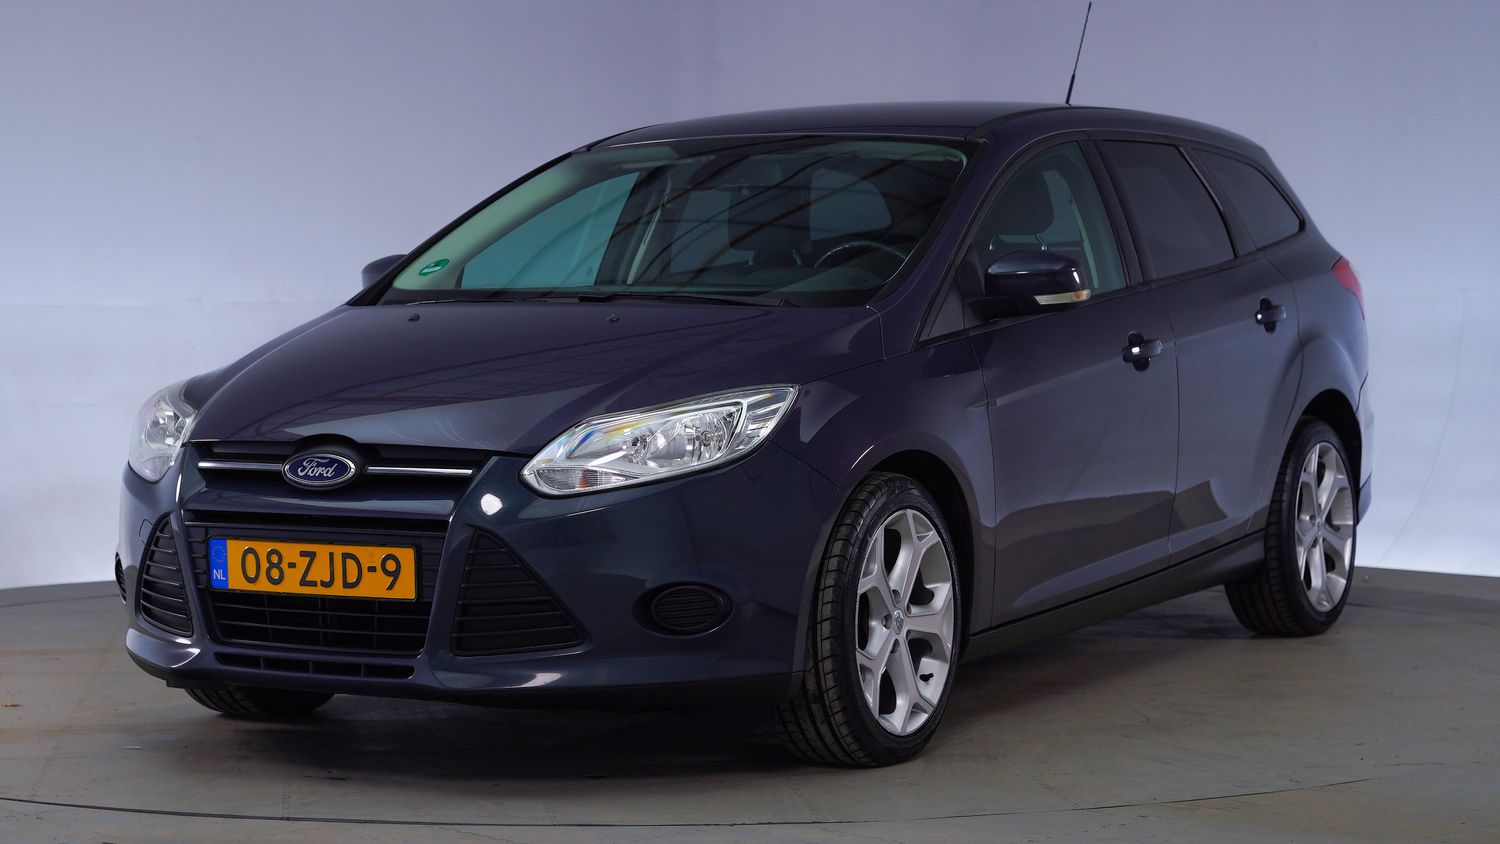 Ford Focus Station 2012 08-ZJD-9 1